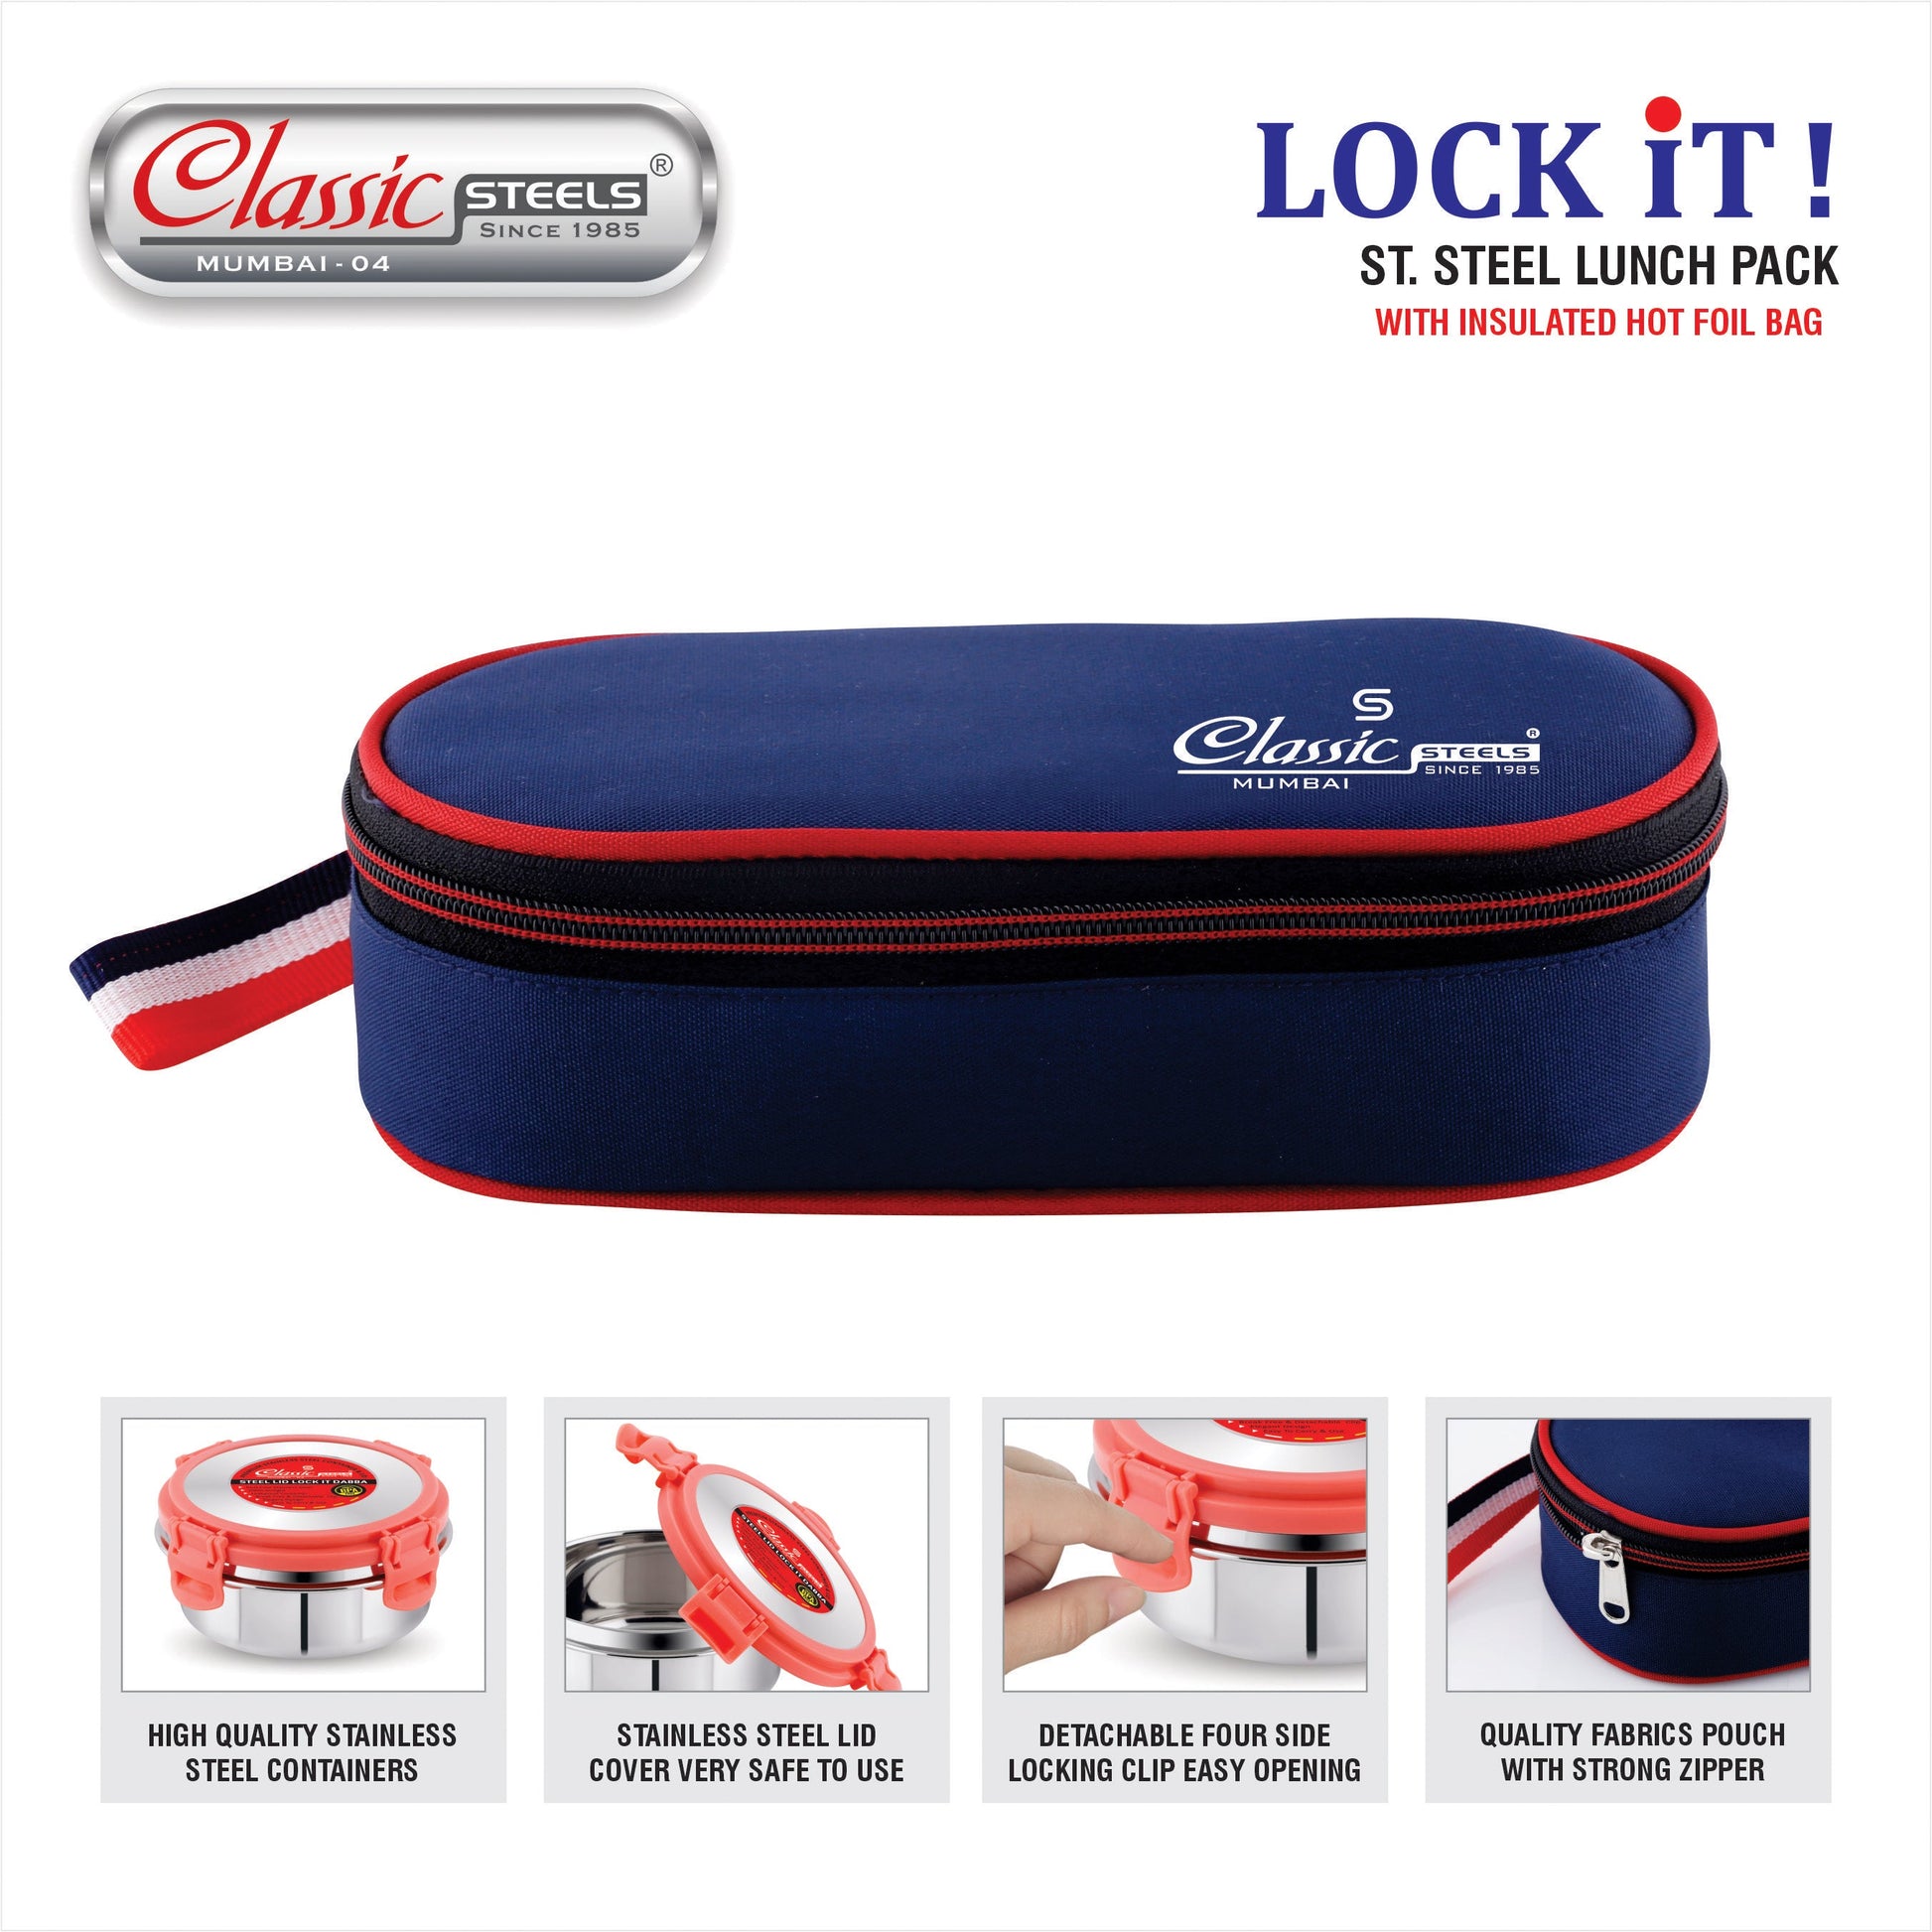 2 St.Steel Lunch Pack With Insulated Hot Foil Bag Classic Steels